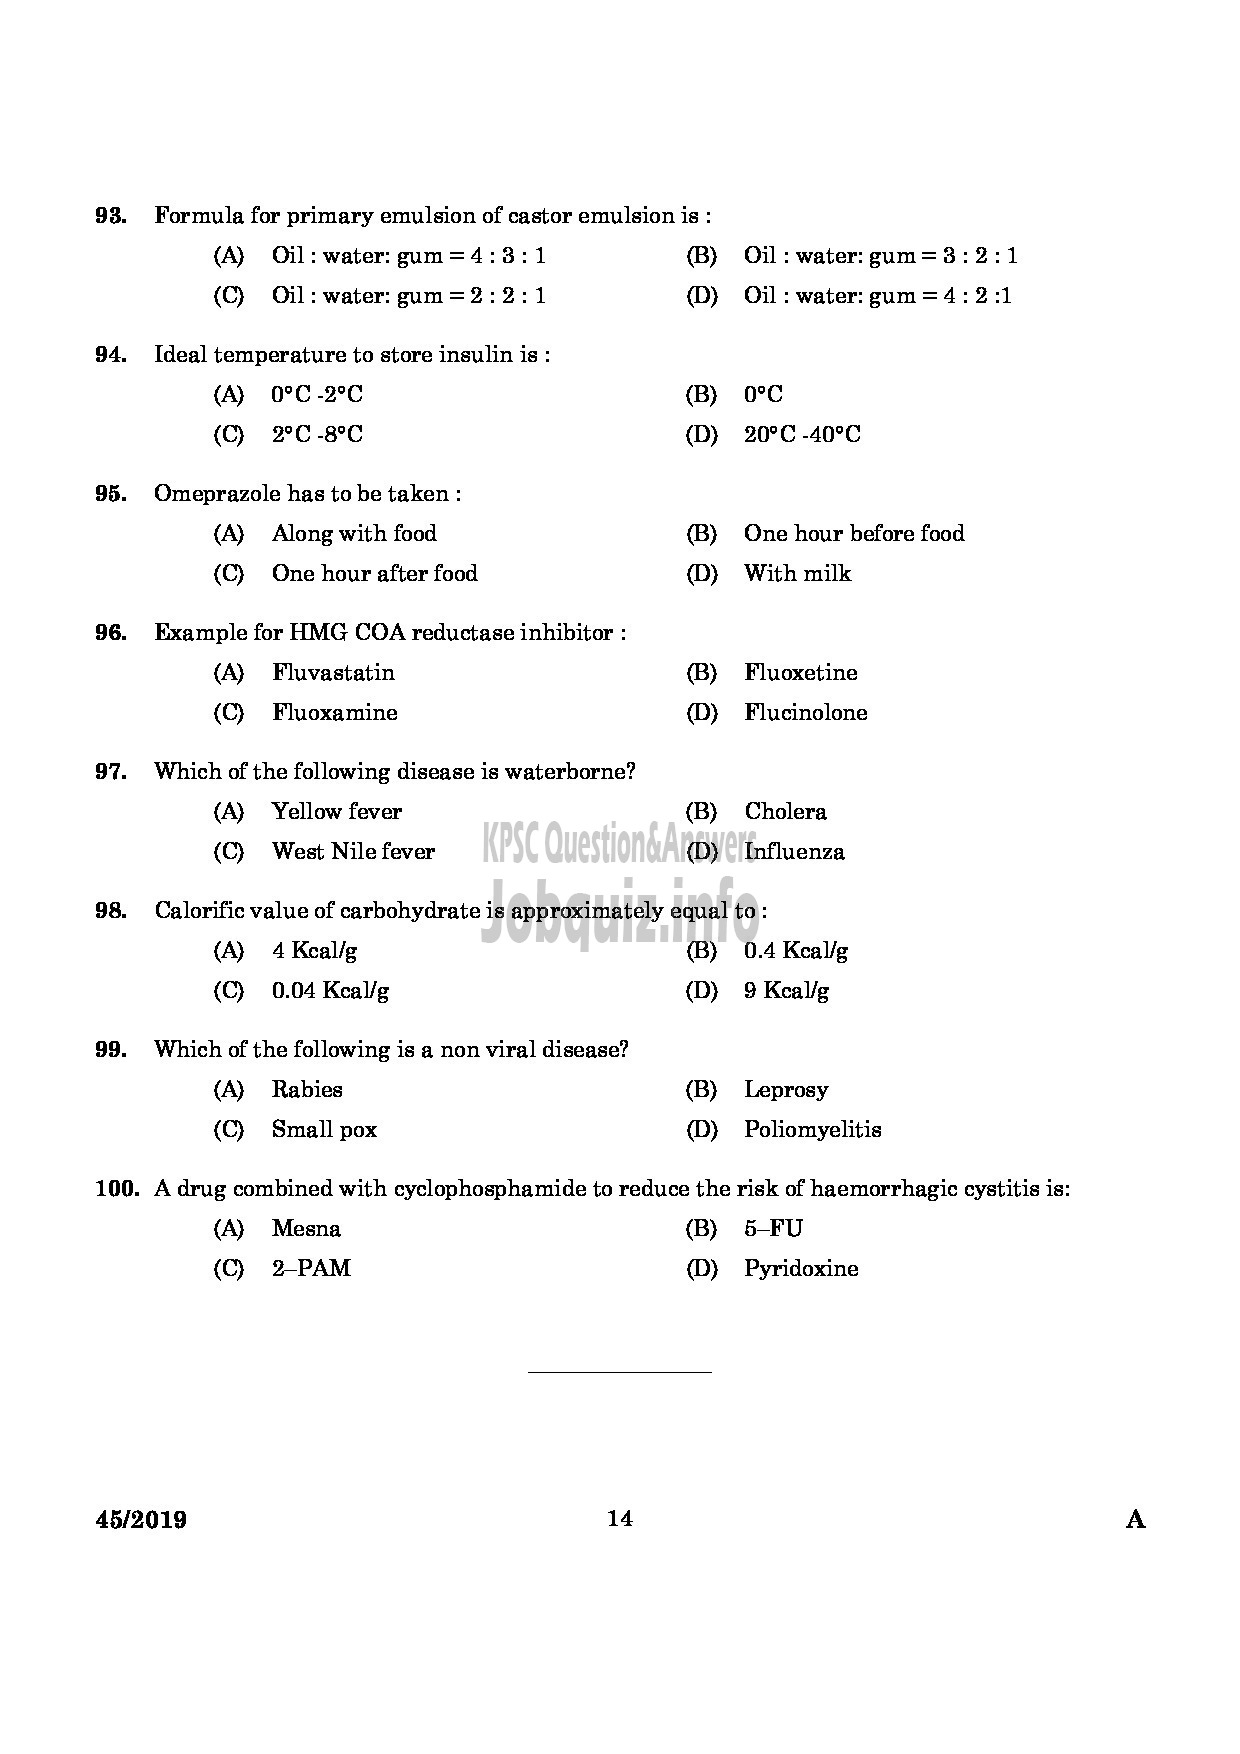 Kerala PSC Question Paper - Pharmacist Gr II Health Services/IMS English -12